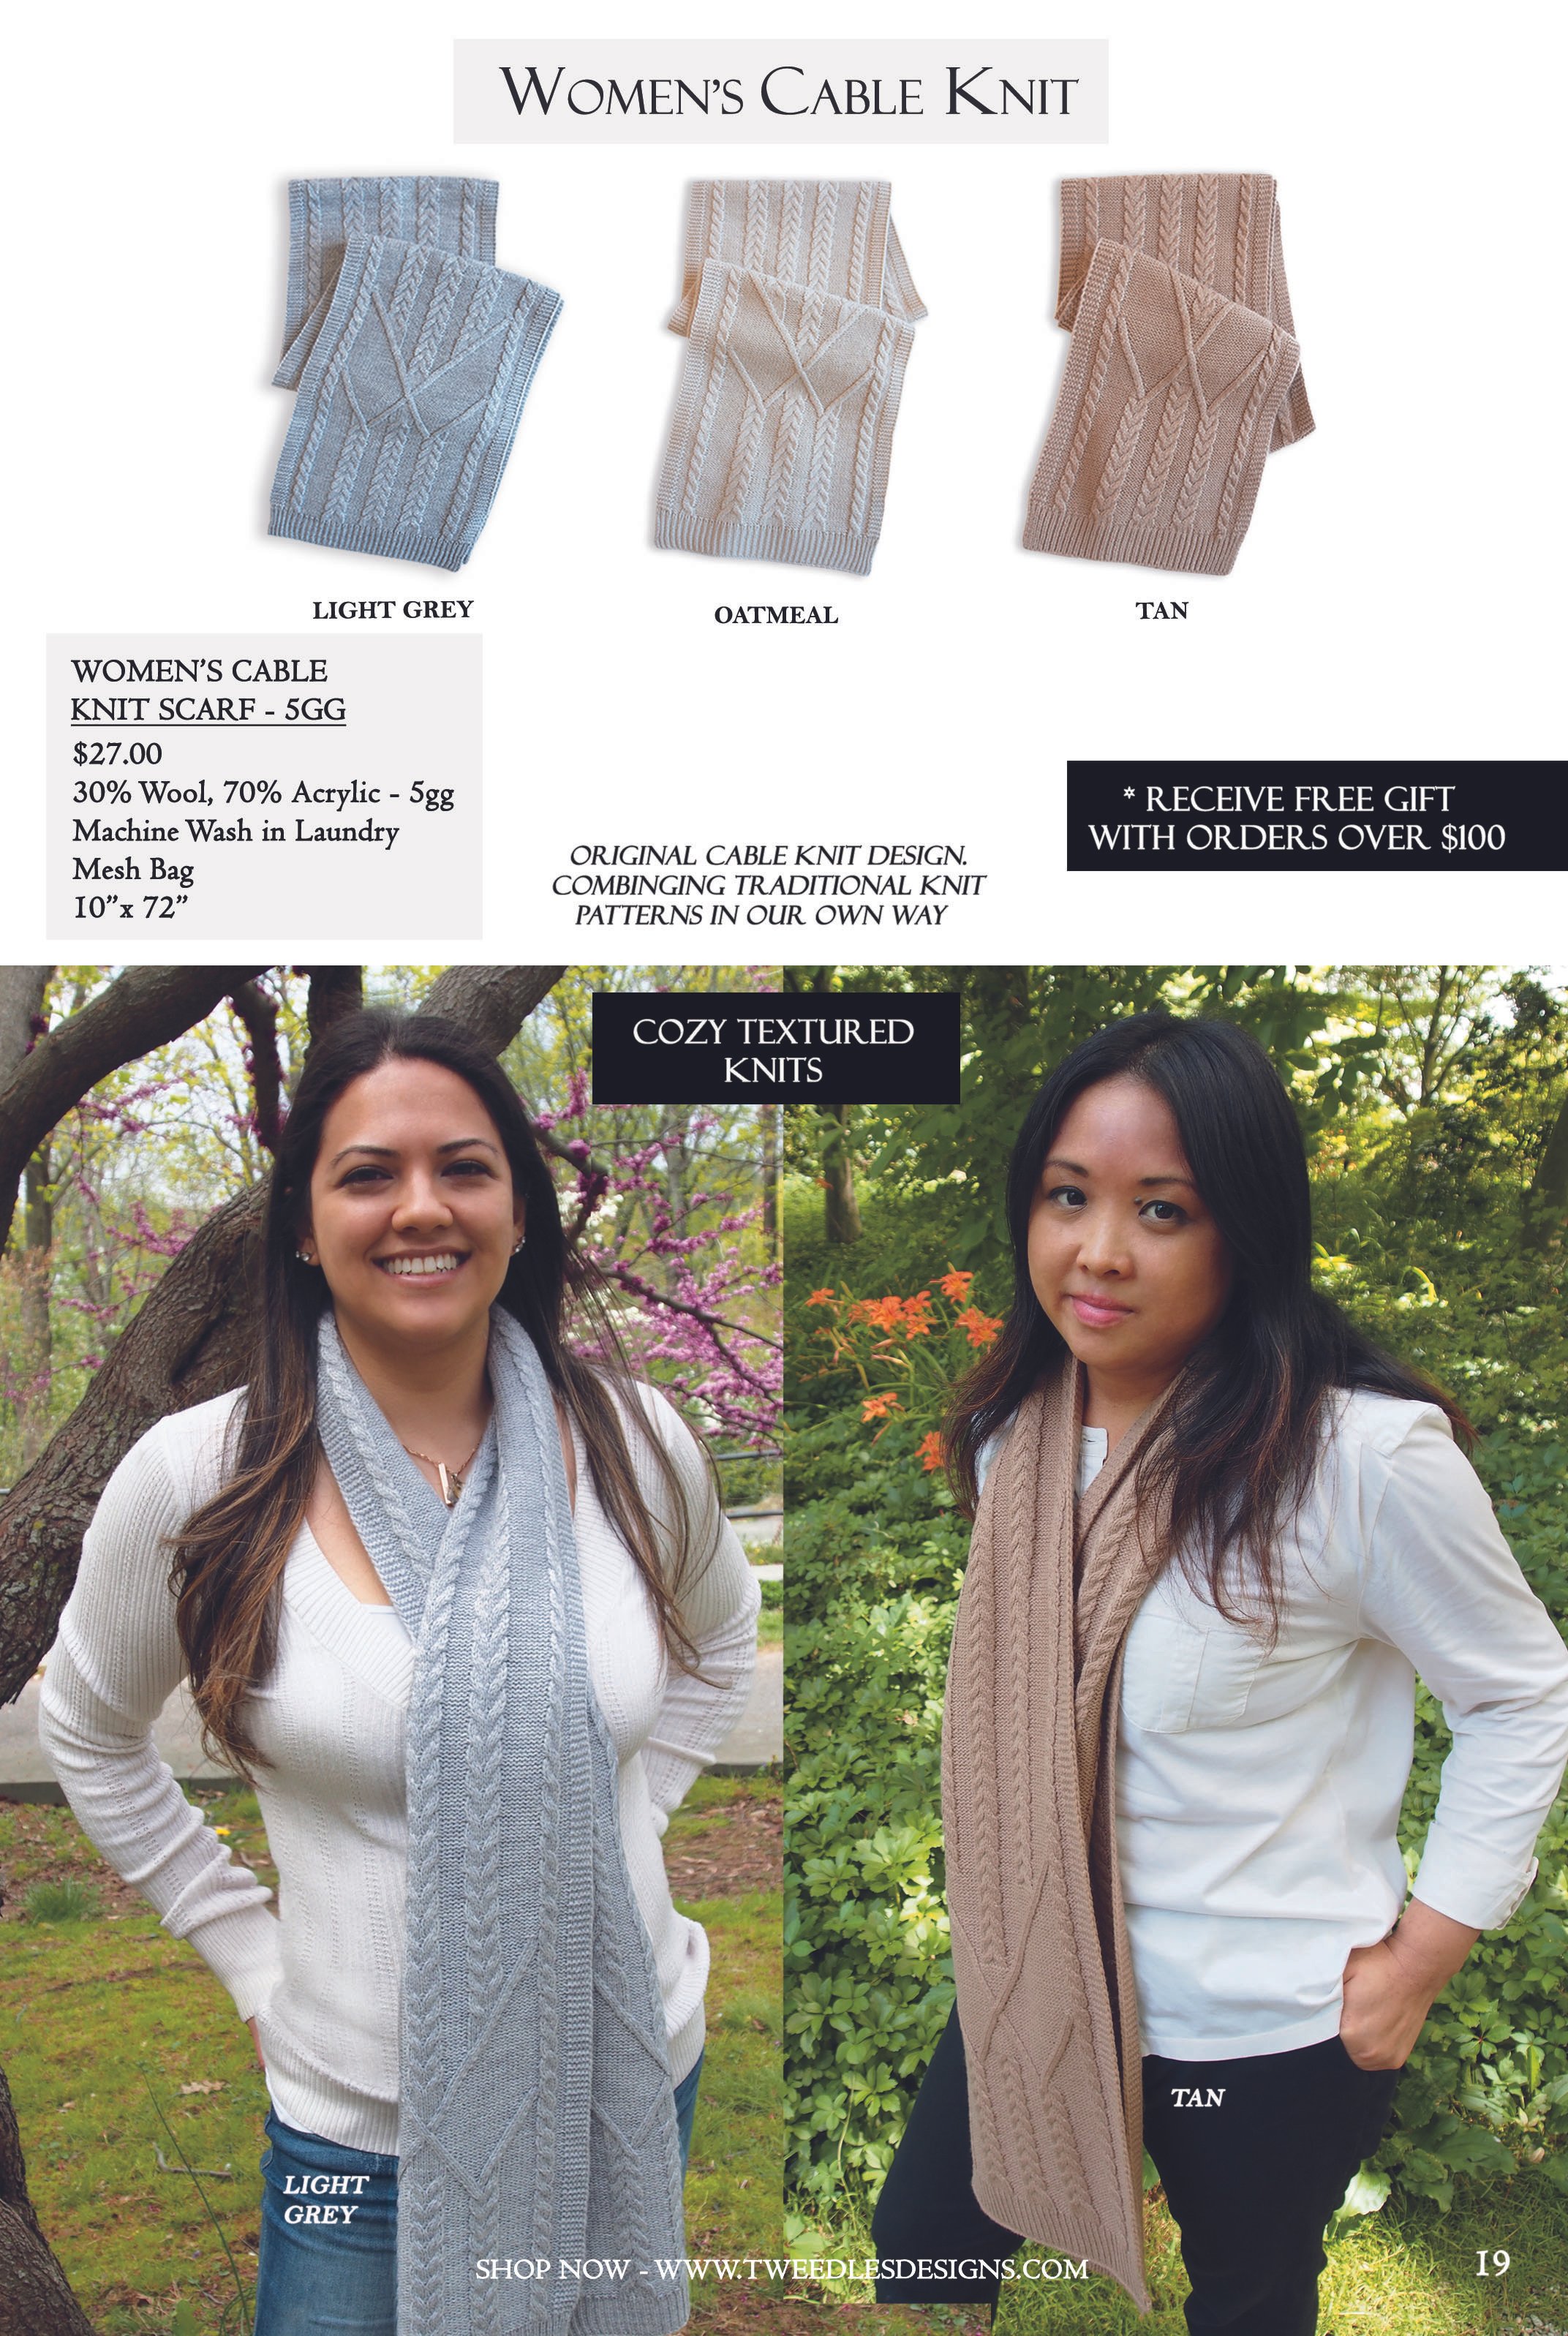 Catalog 2023 - Page 19 - (Women's Cable Knit).jpg